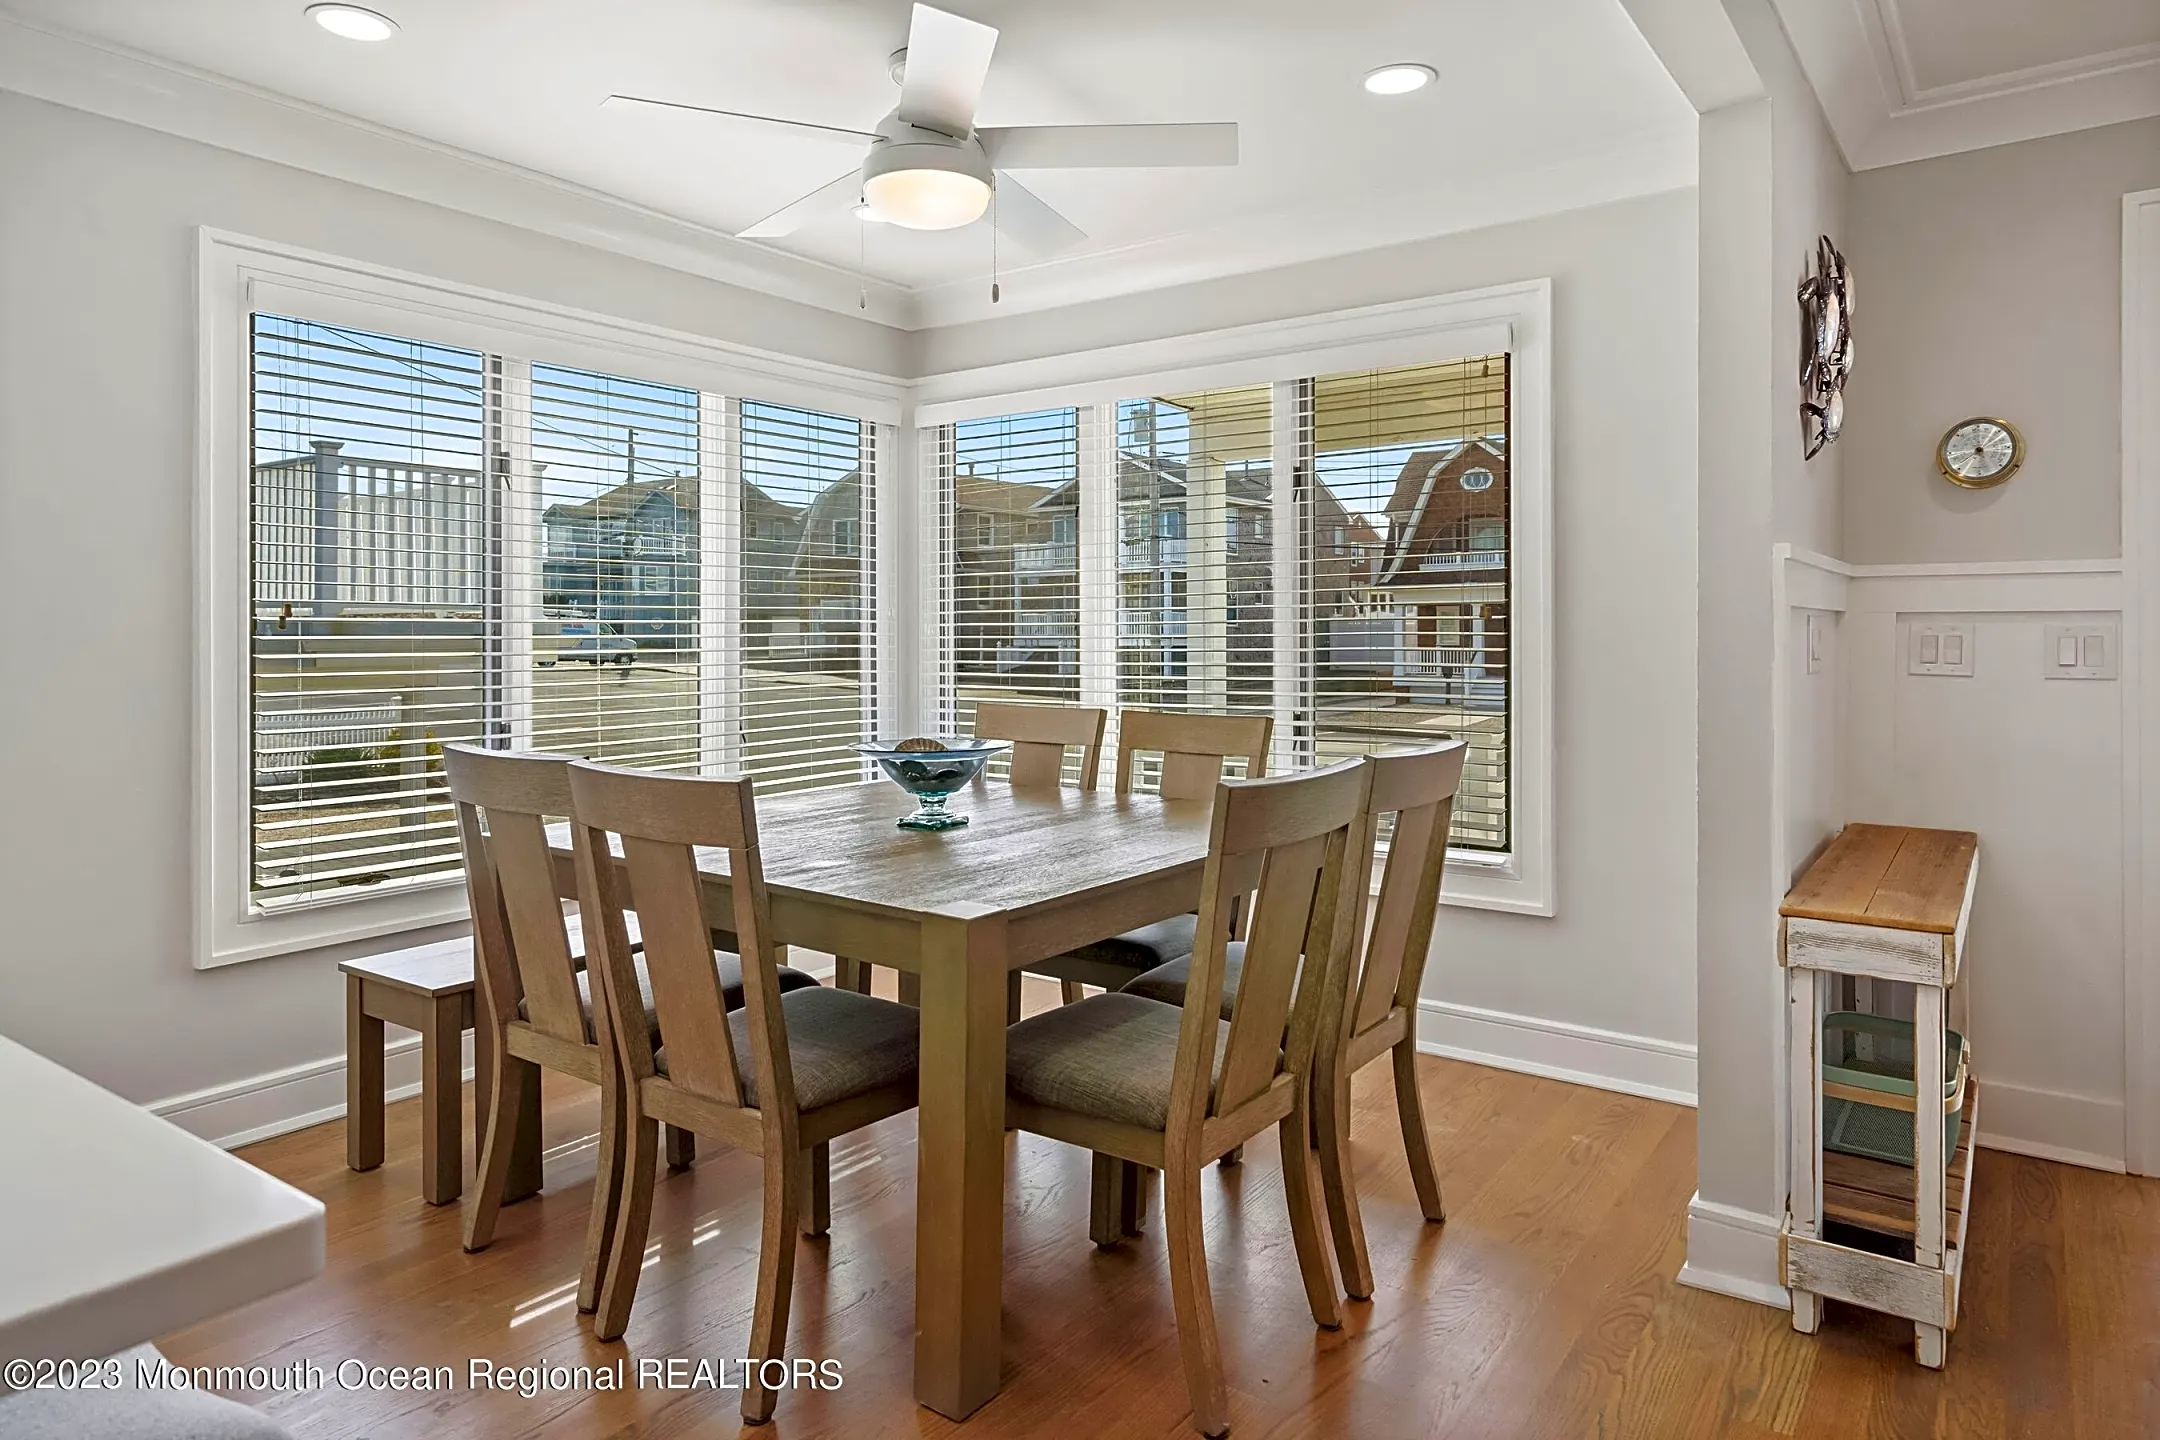 Dining Room - 7 New York Ave #FRONT - Lavallette, NJ